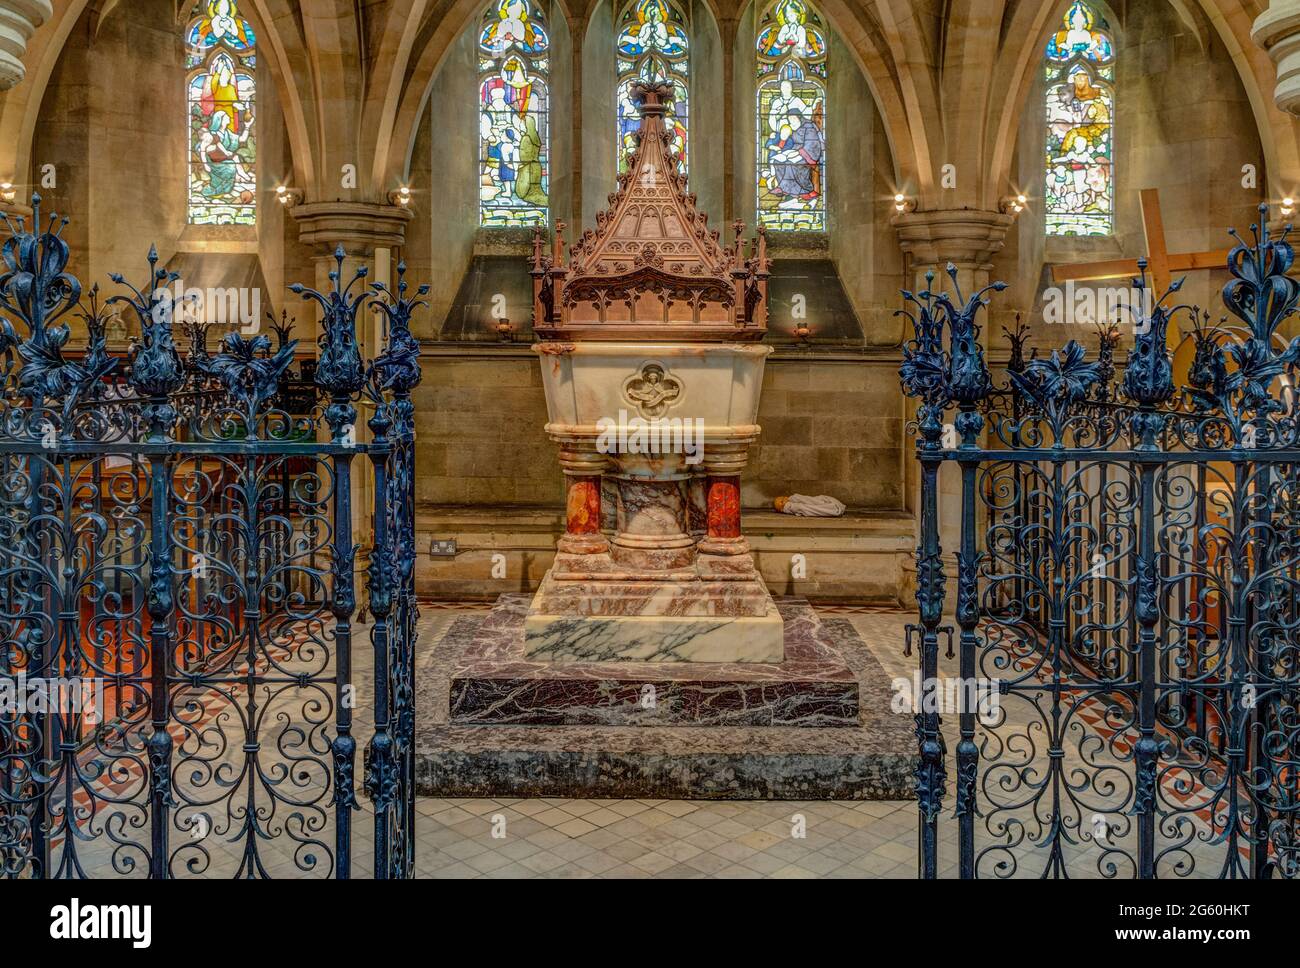 Interior of St Matthews Church, Northampton UK: built in 1893 as a memorial to Pickering Phipps, head of the local Phipps Brewery. Stock Photo